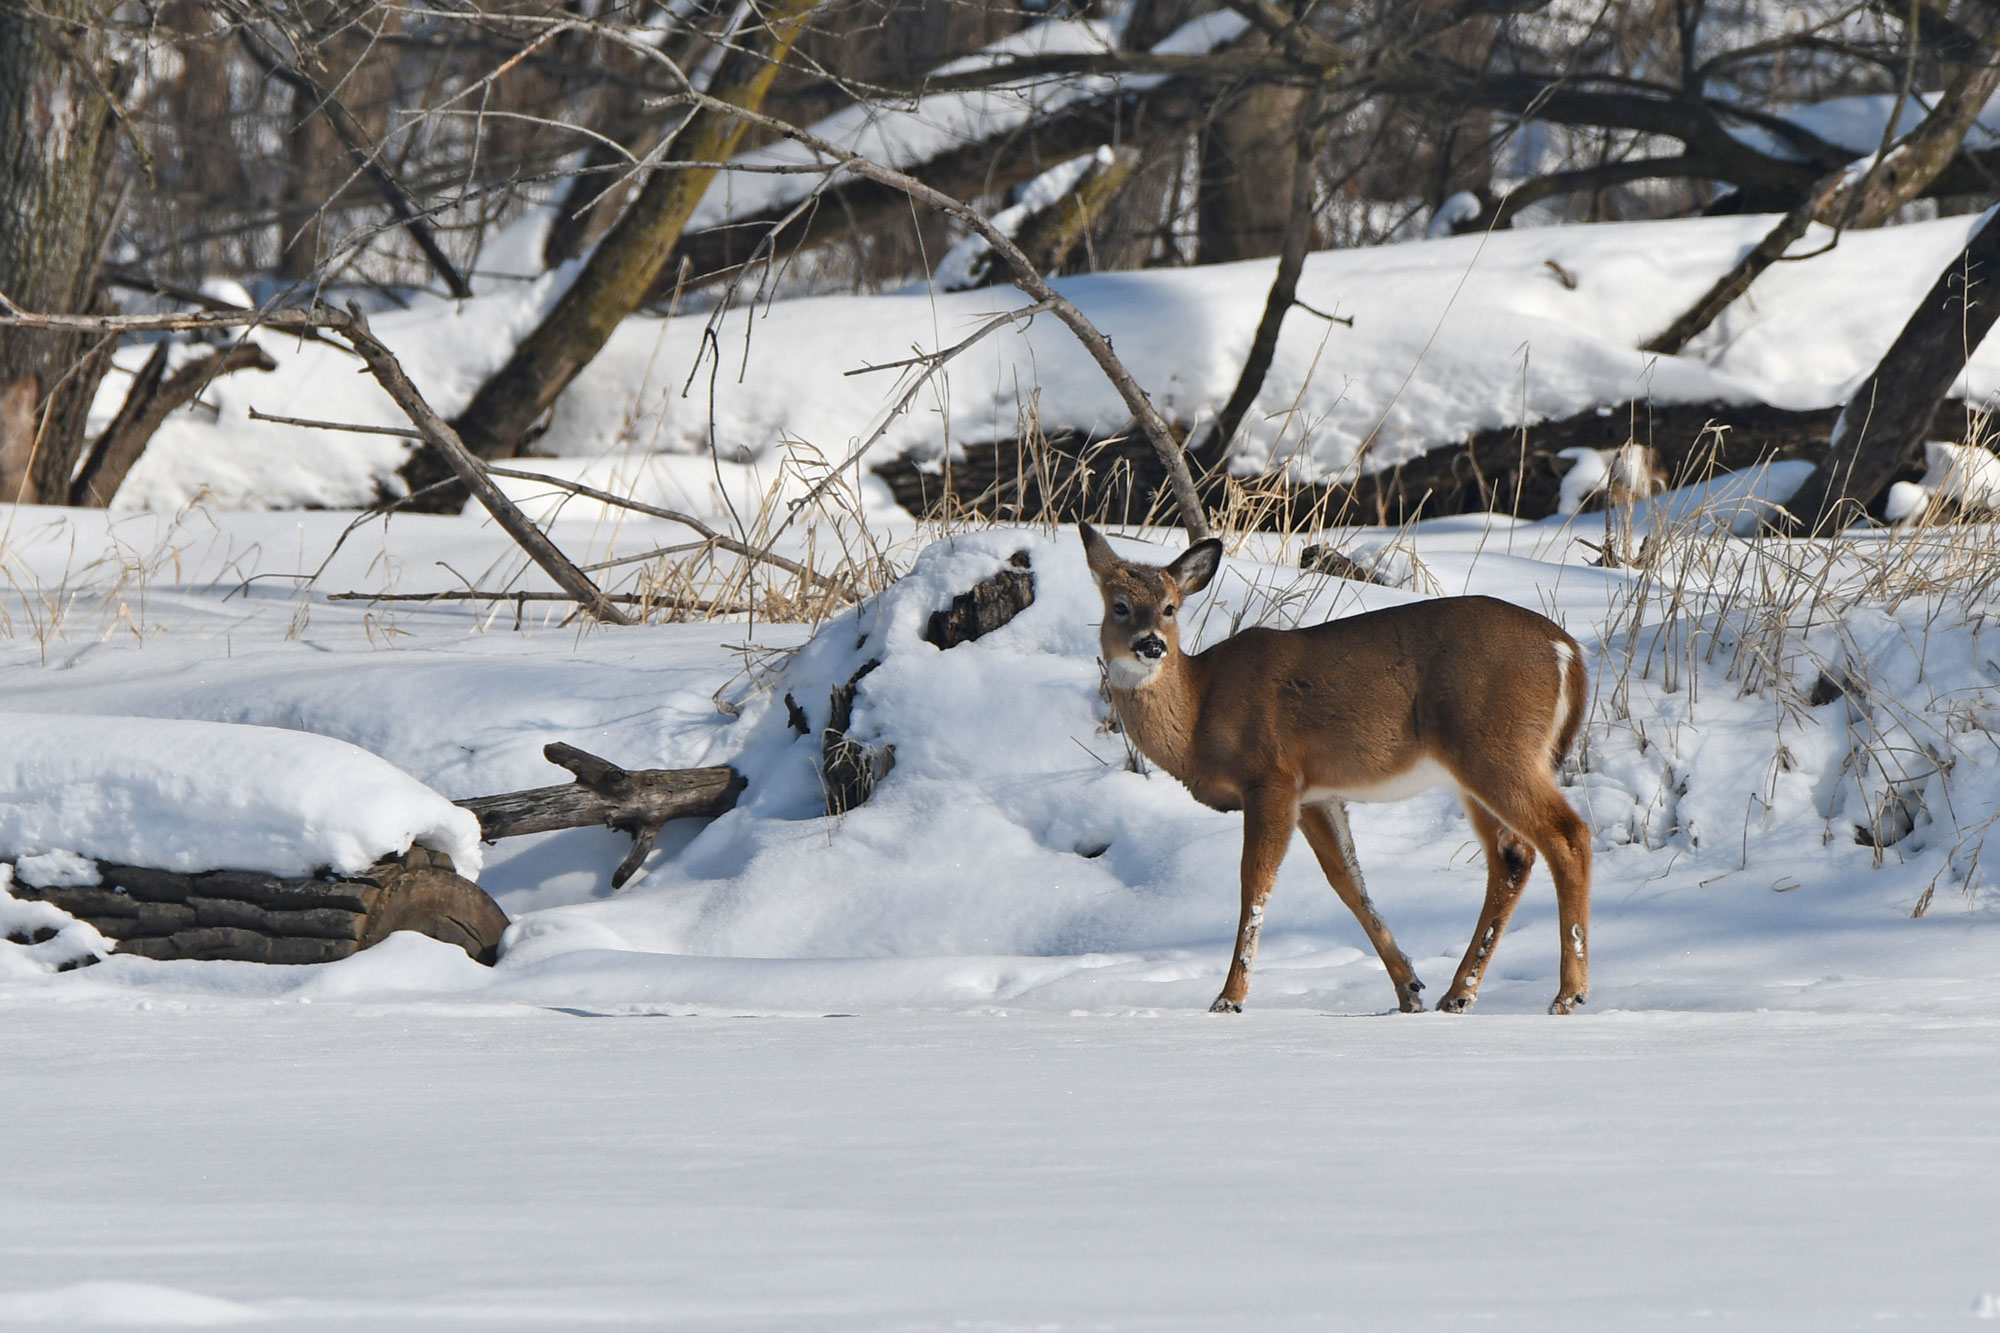 Nature curiosity: How do deer stay warm in winter?